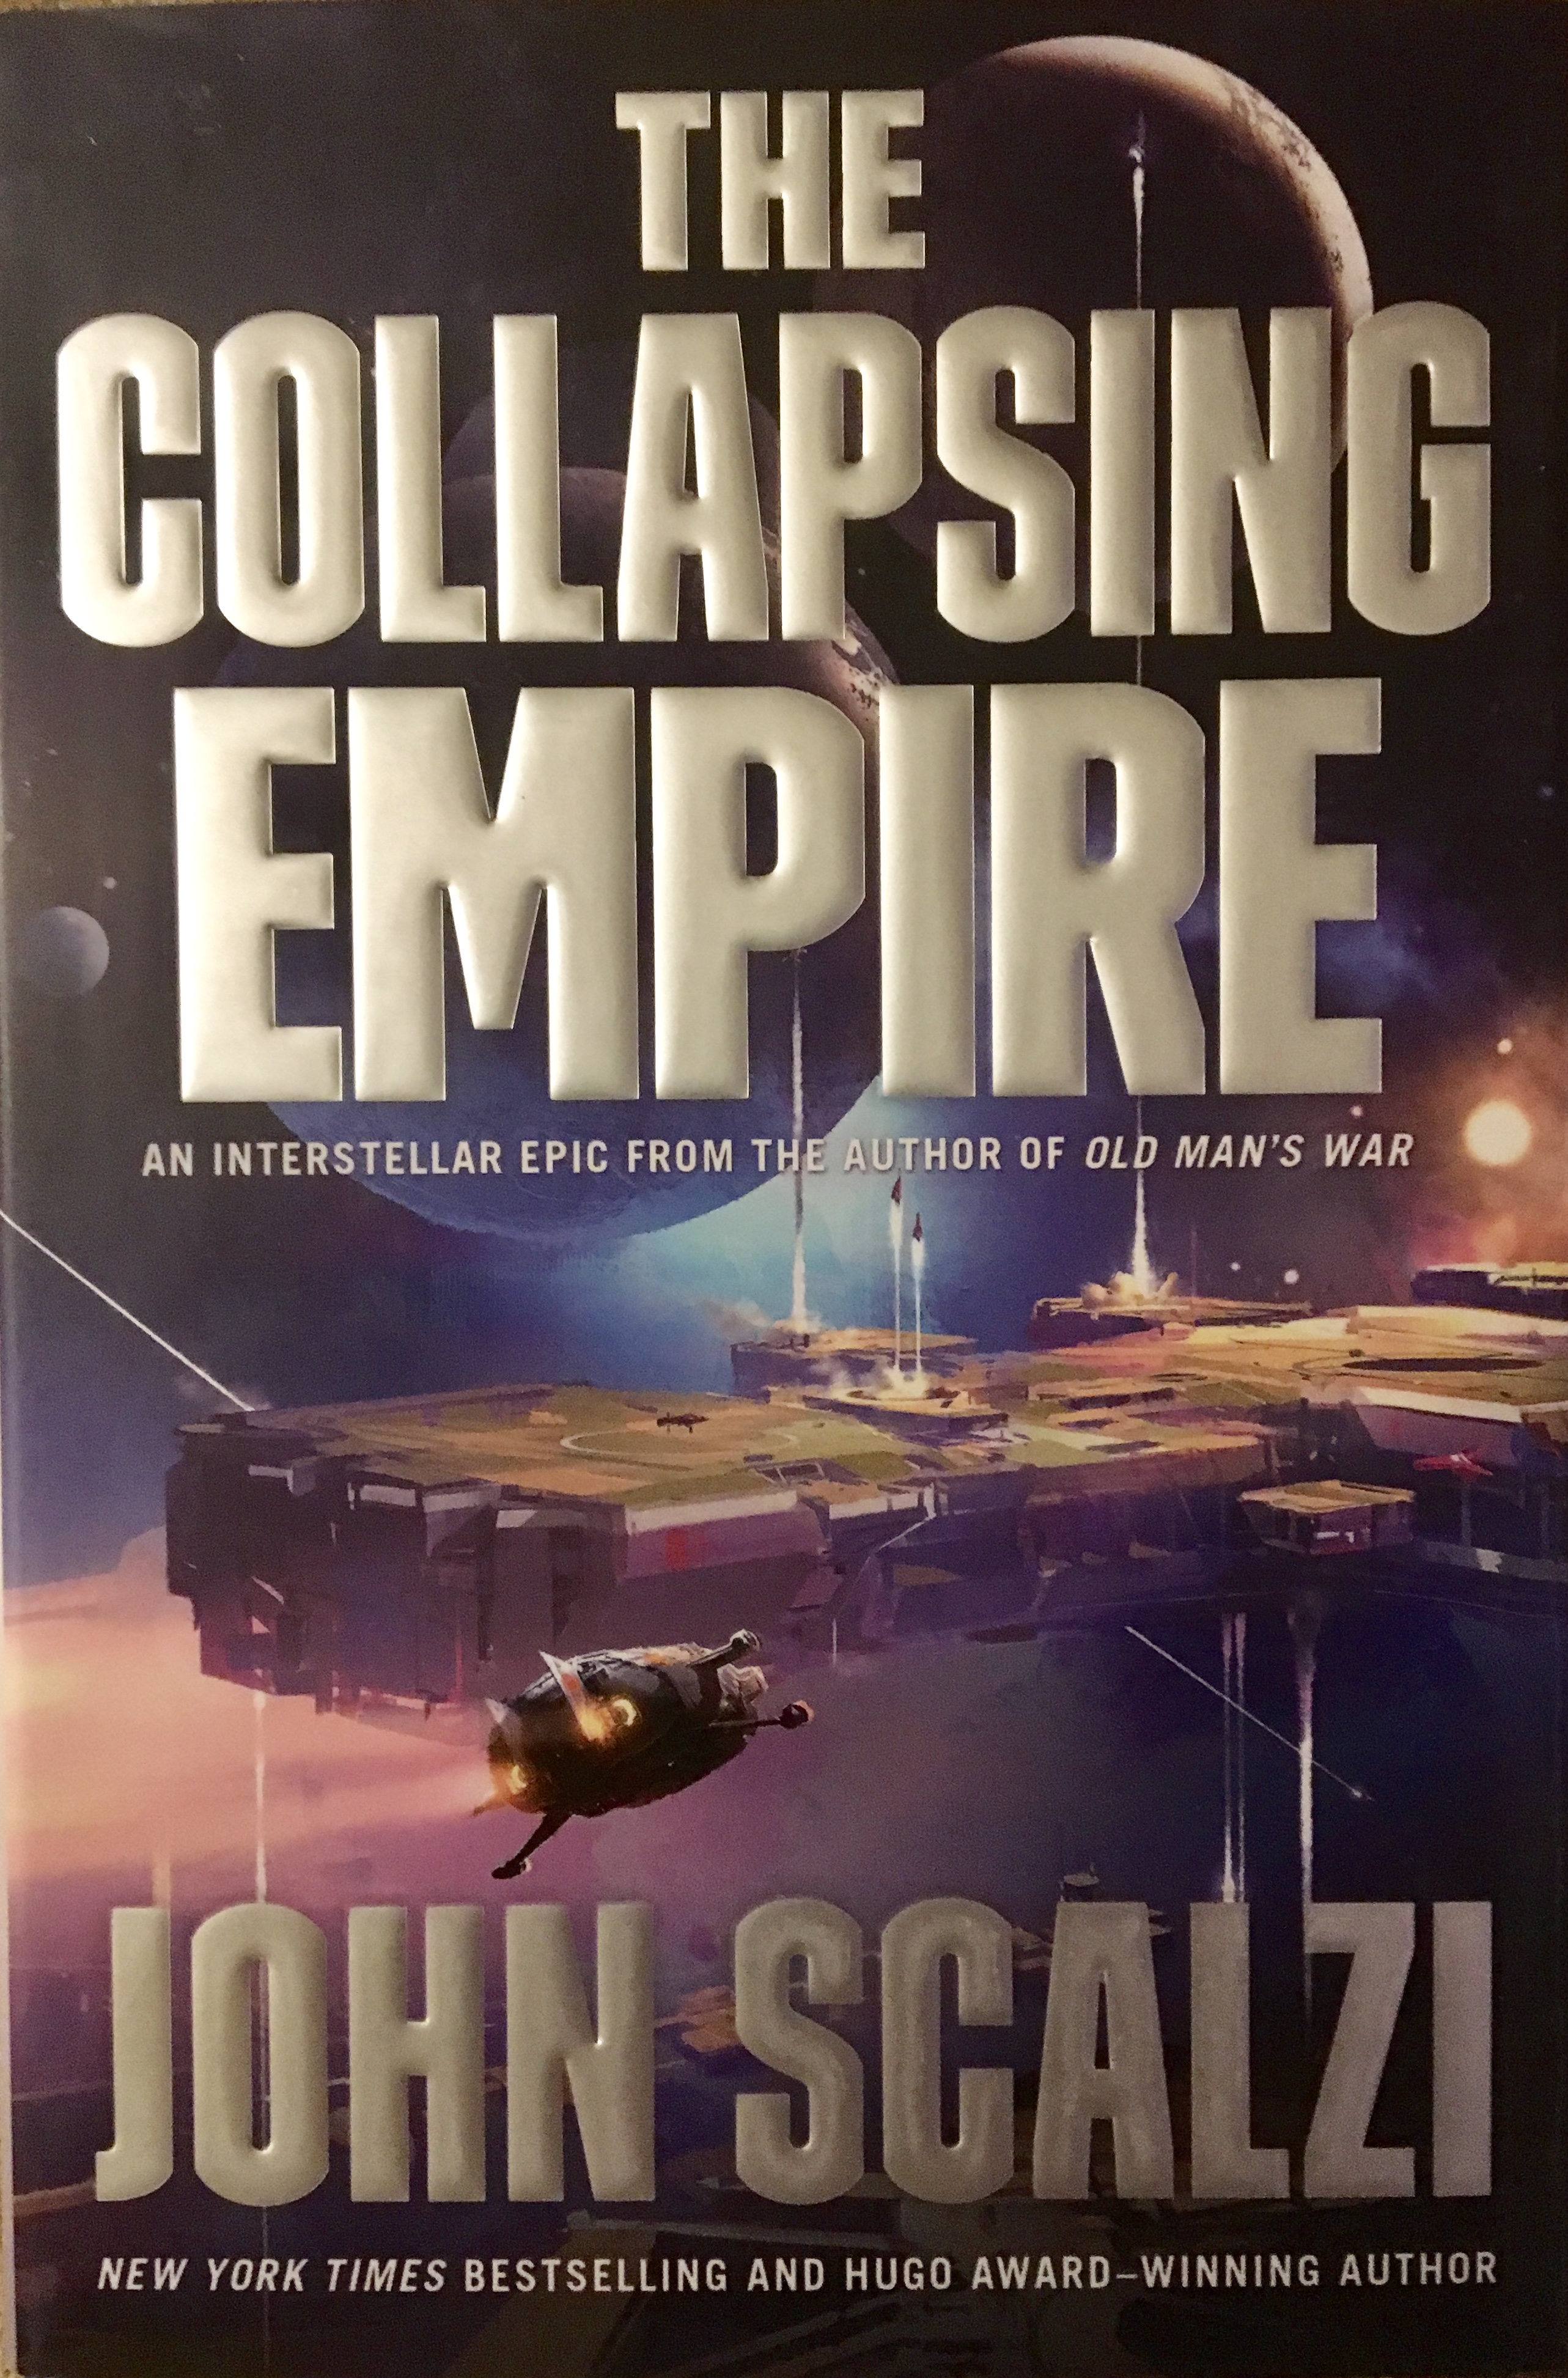 The Collapsing Empire by John Scalzi, Paperback